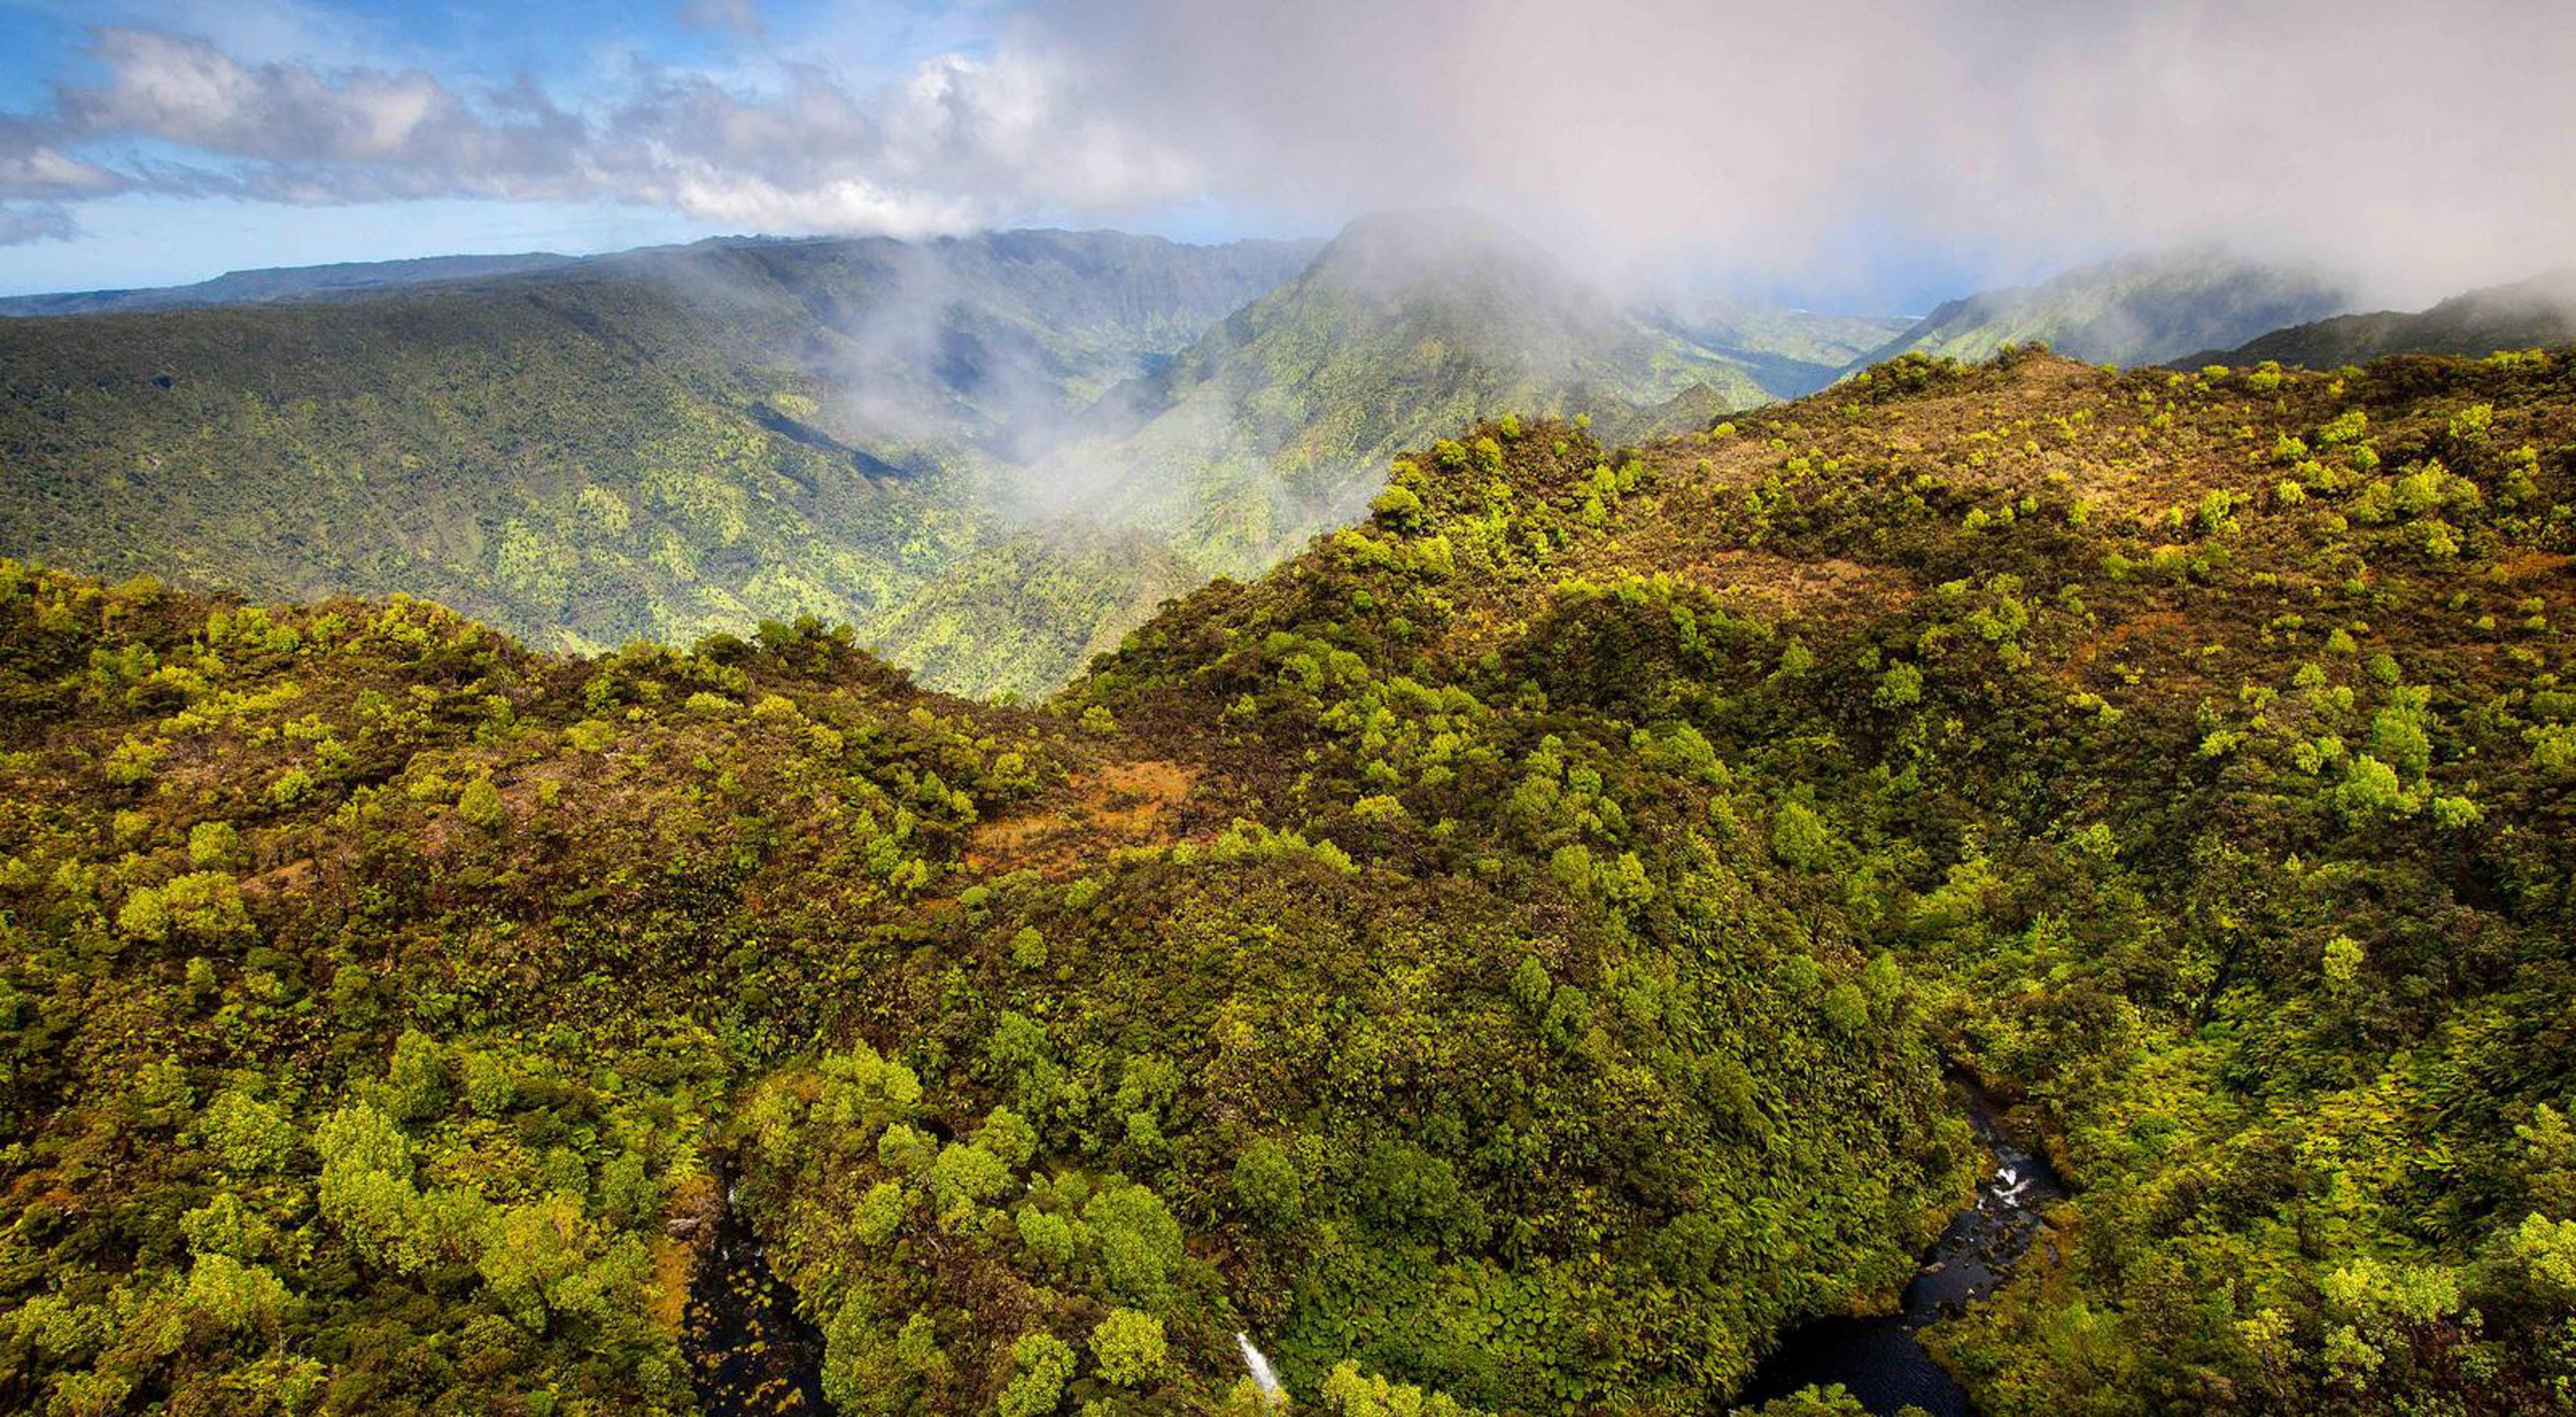 Mountaintop view of a thickly forested mountains and foggy valleys in Hawaii.